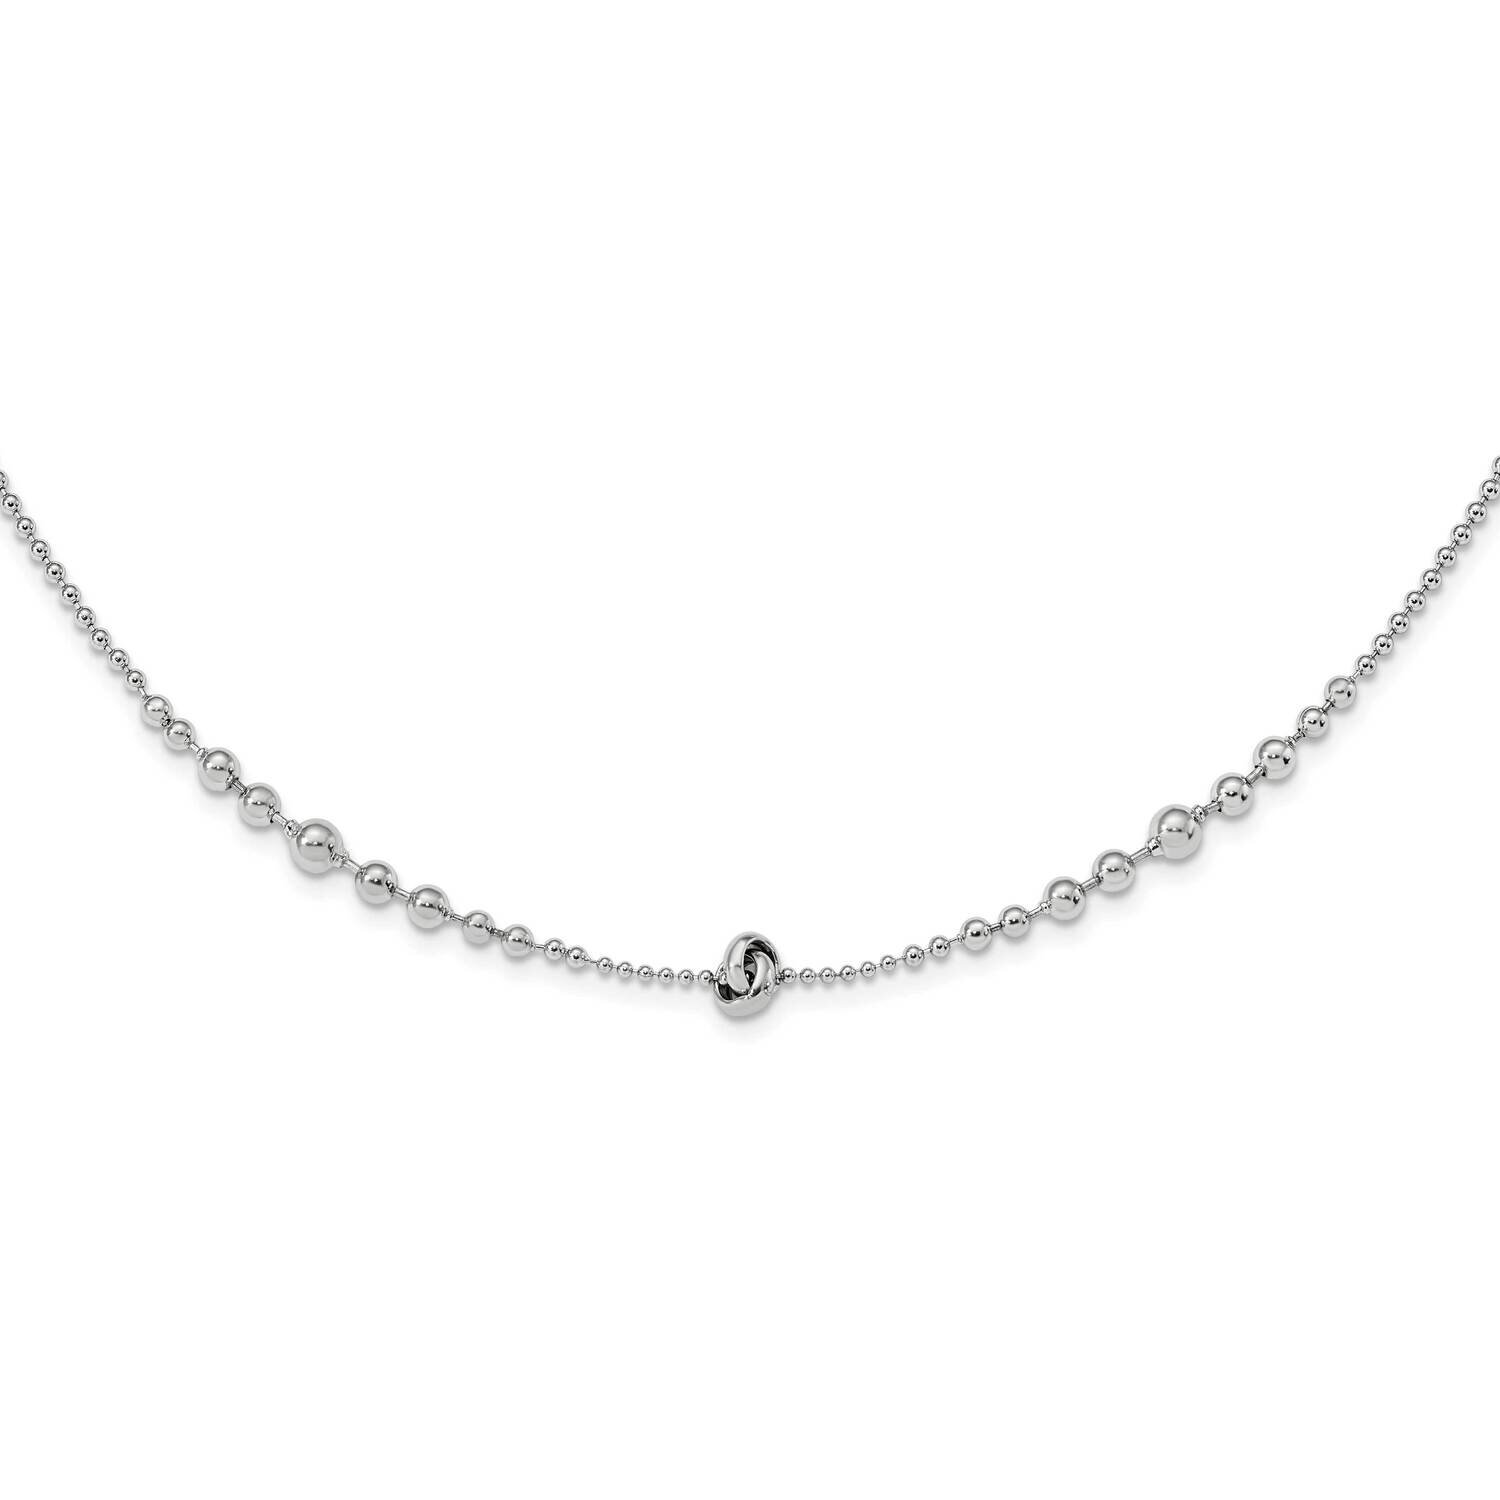 Beaded with 2.5 Inch Extender Necklace 17.5 Inch Sterling Silver Rhodium-Plated Polished QG5977-17.5